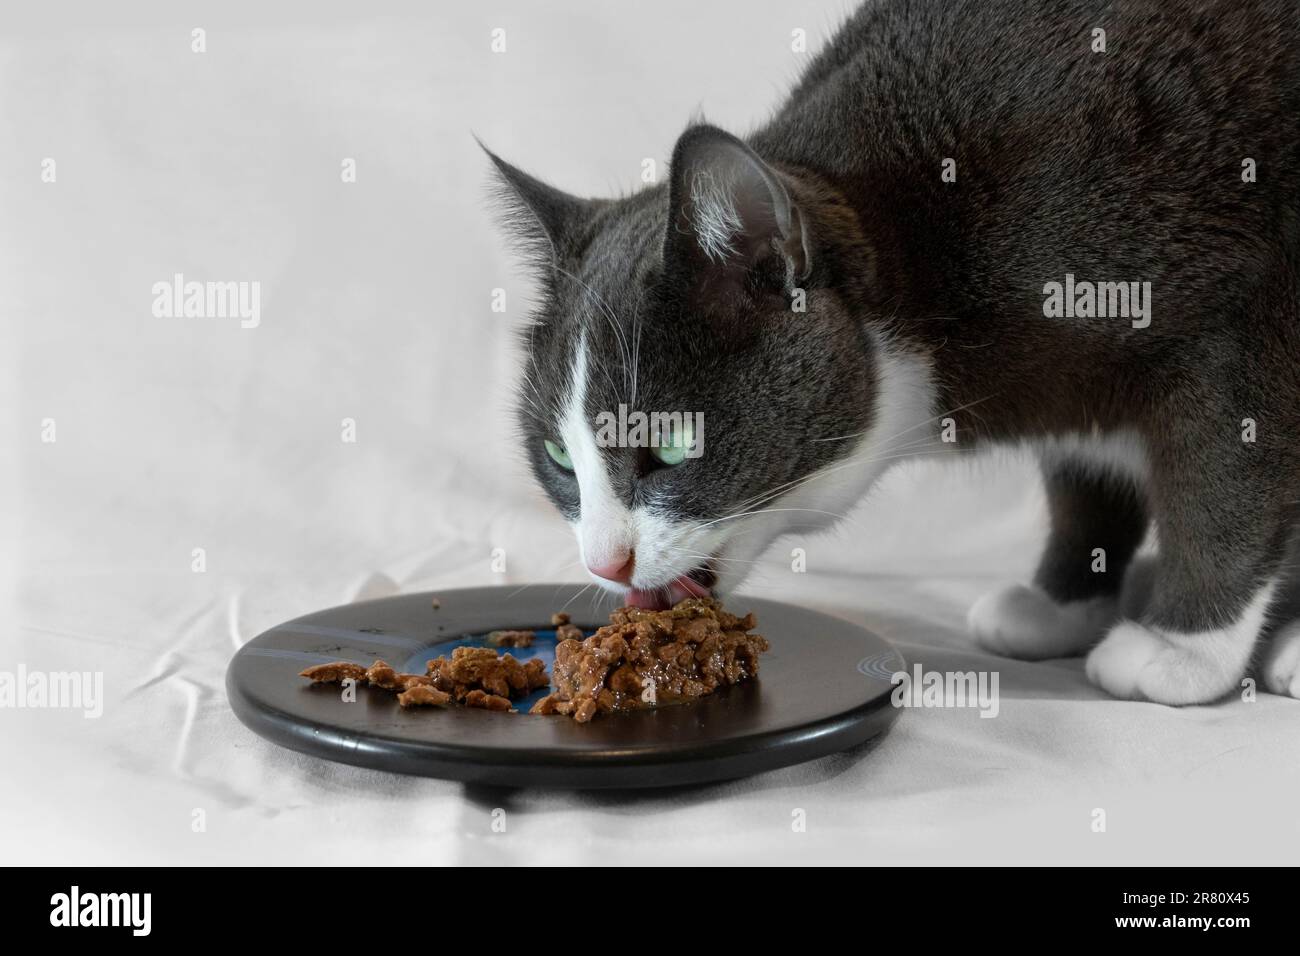 Grey and white cat eating wet food off a plate with light background Stock Photo